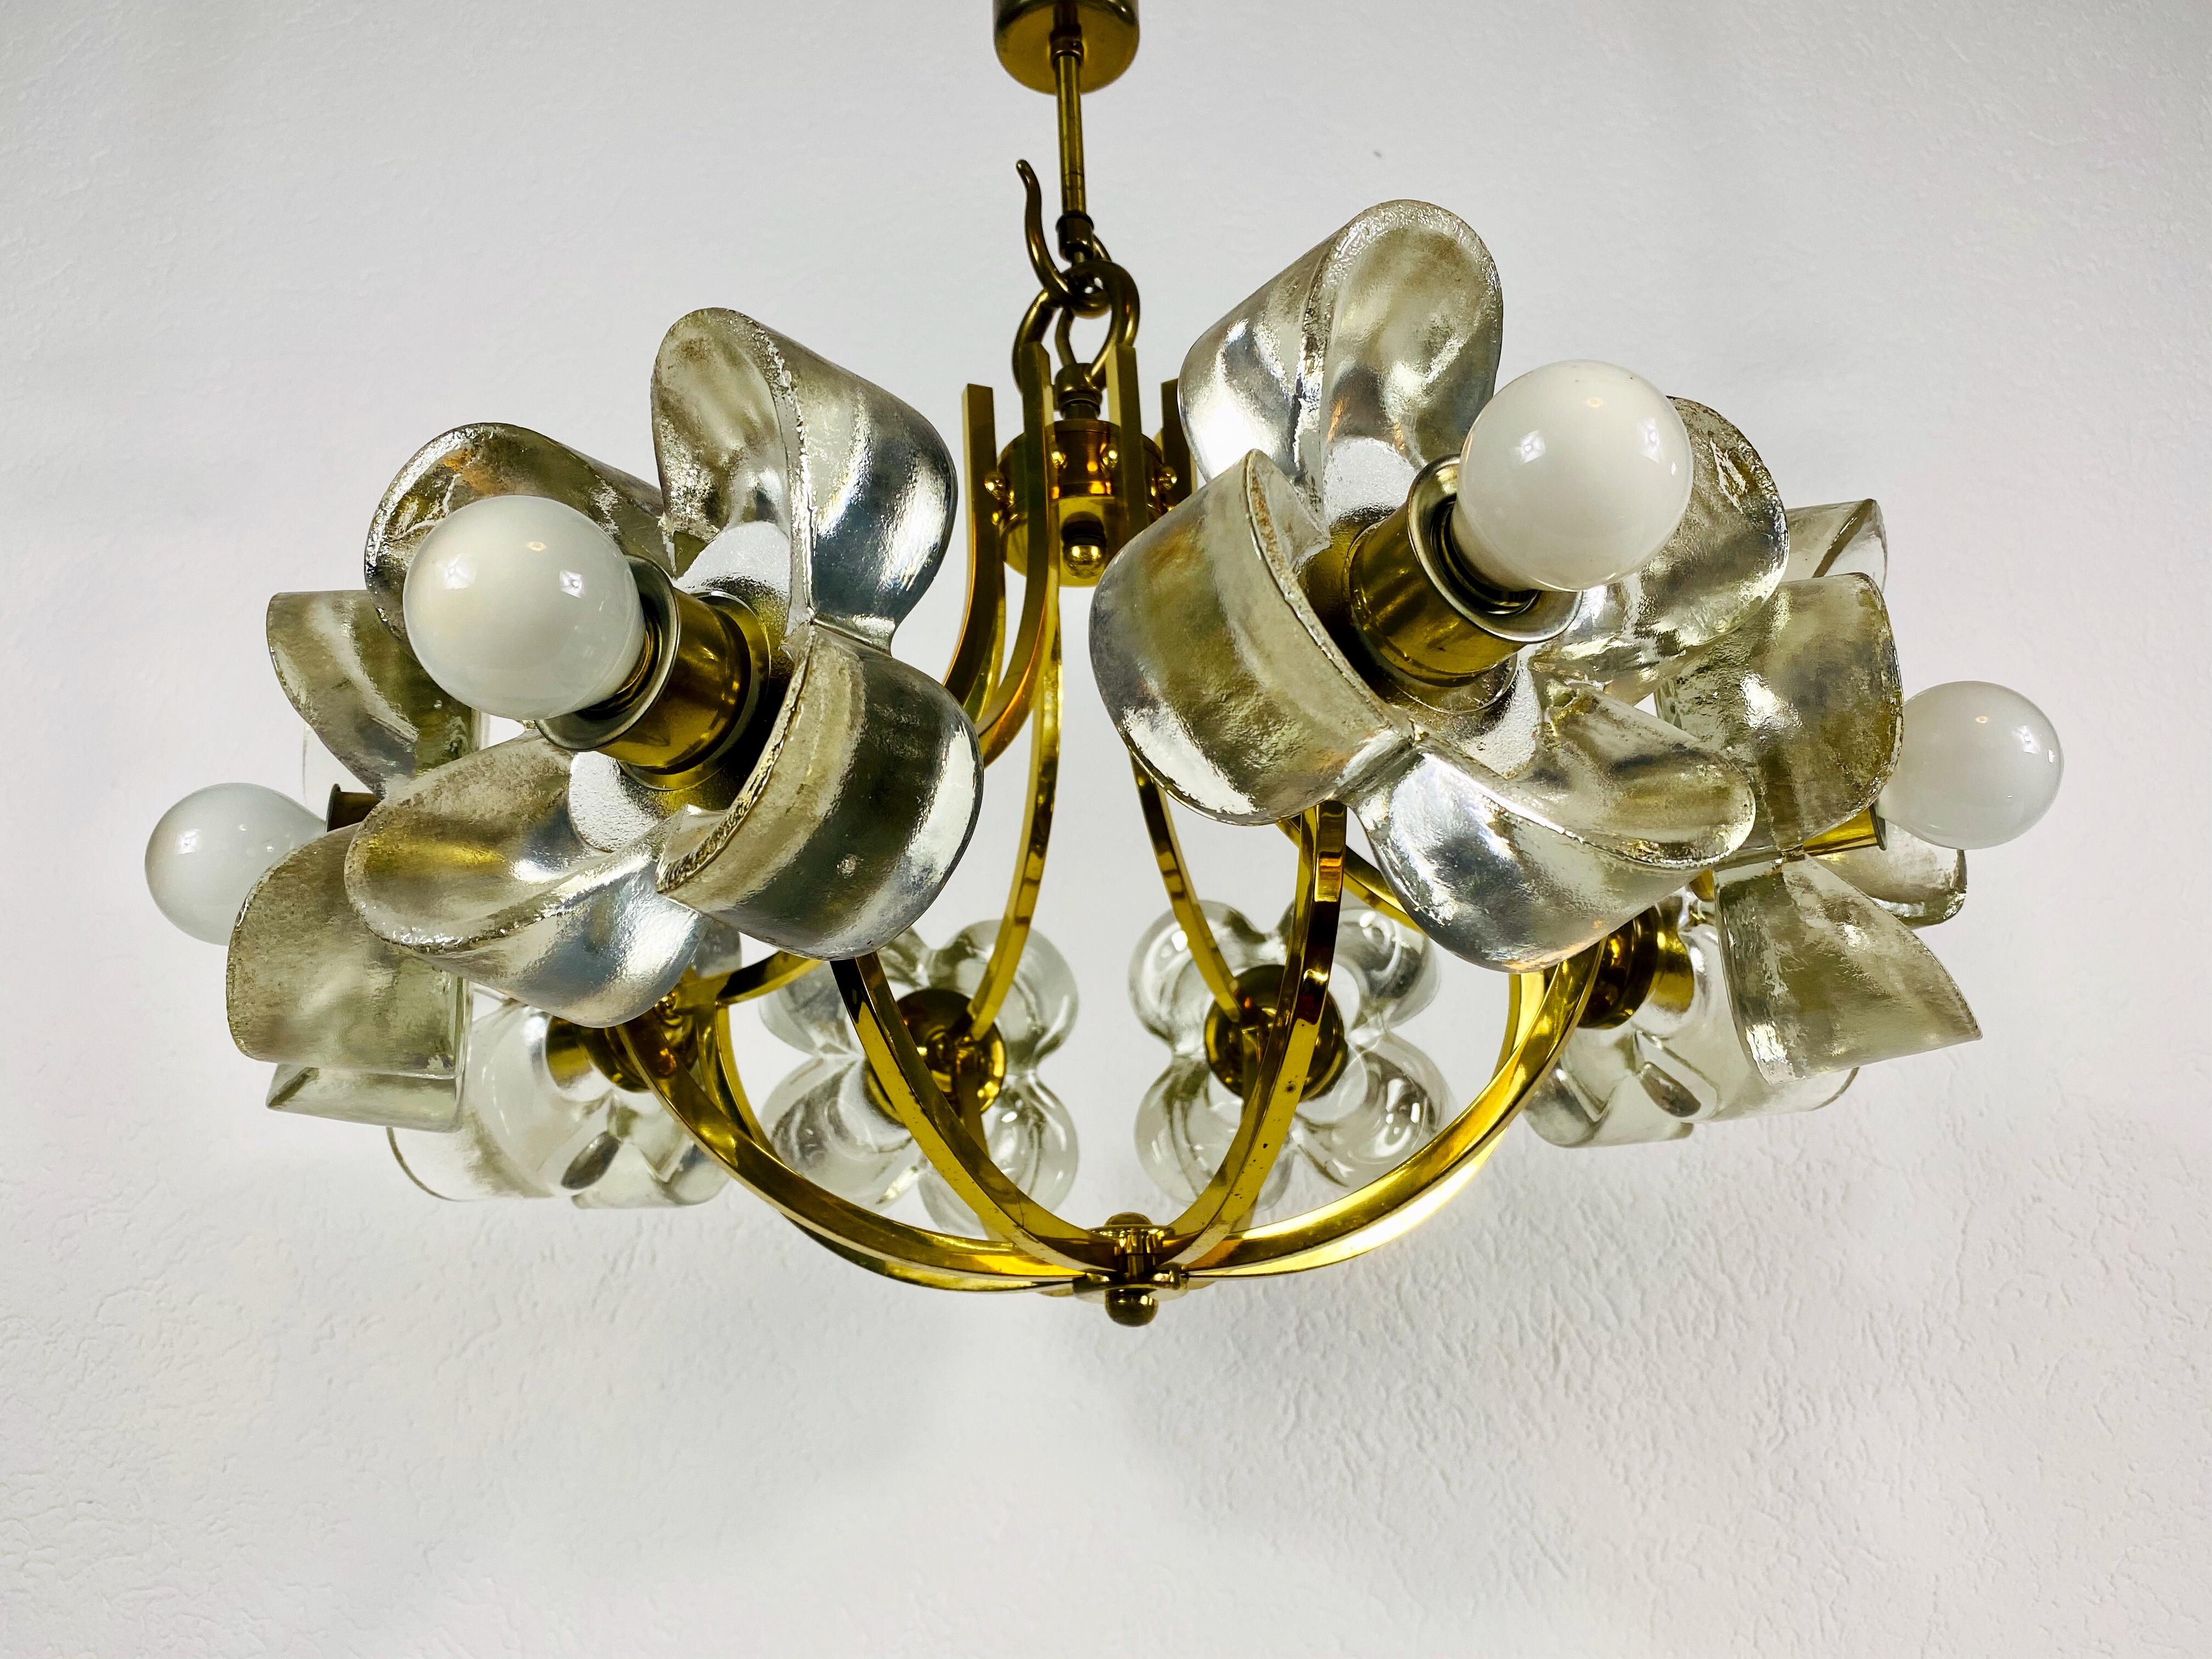 Italian Midcentury Glass and Brass 8-Arm Chandelier Mazzega Attributed, 1960s In Good Condition For Sale In Hagenbach, DE